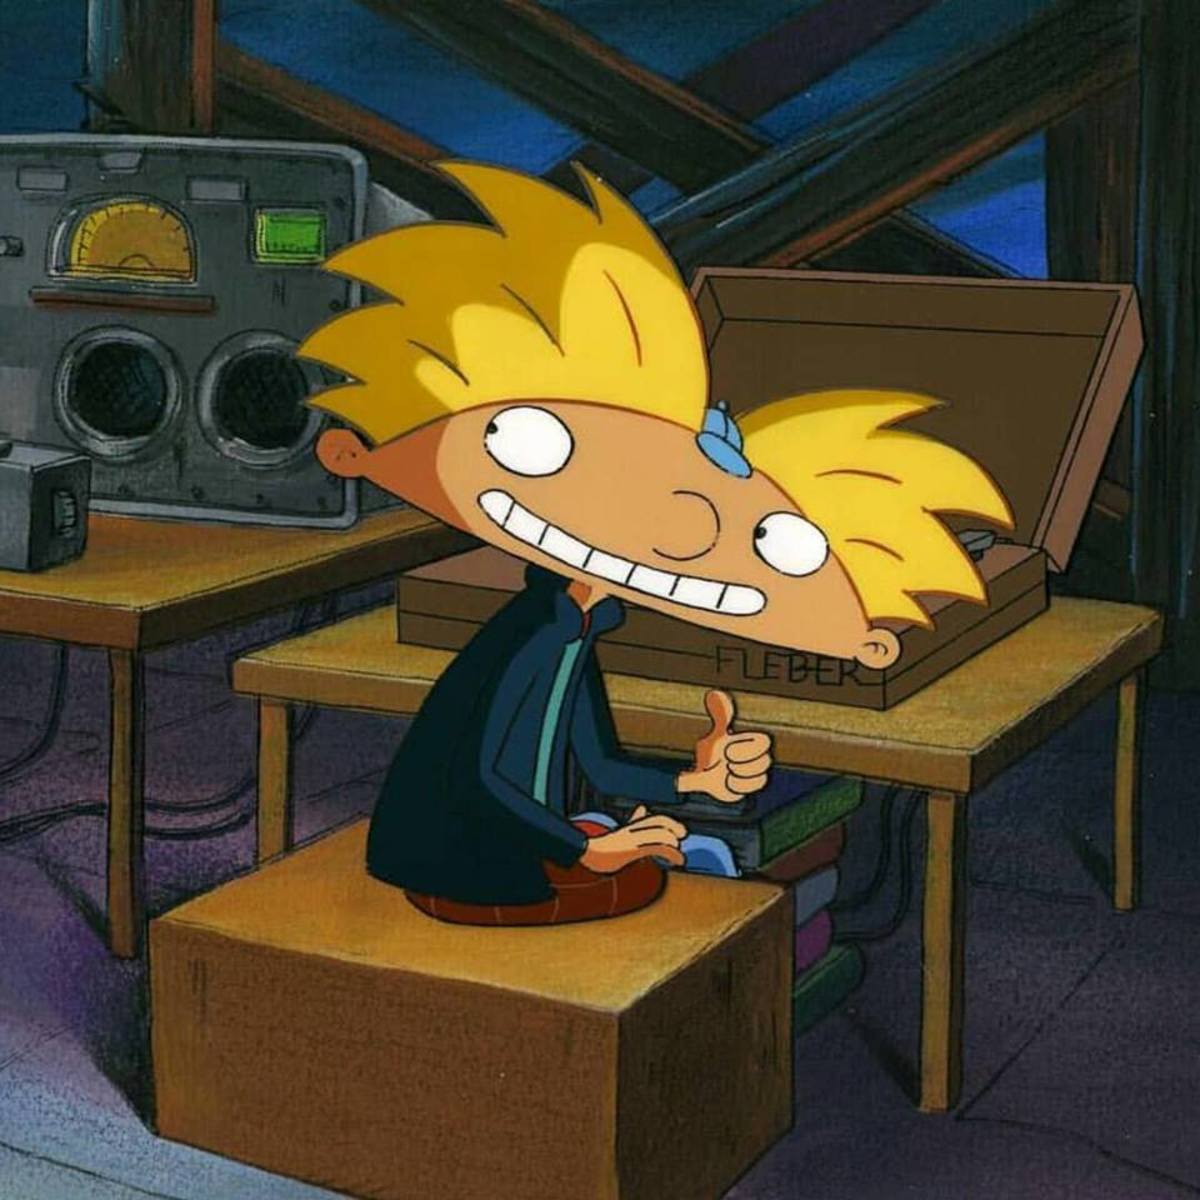 My Love of Hey Arnold